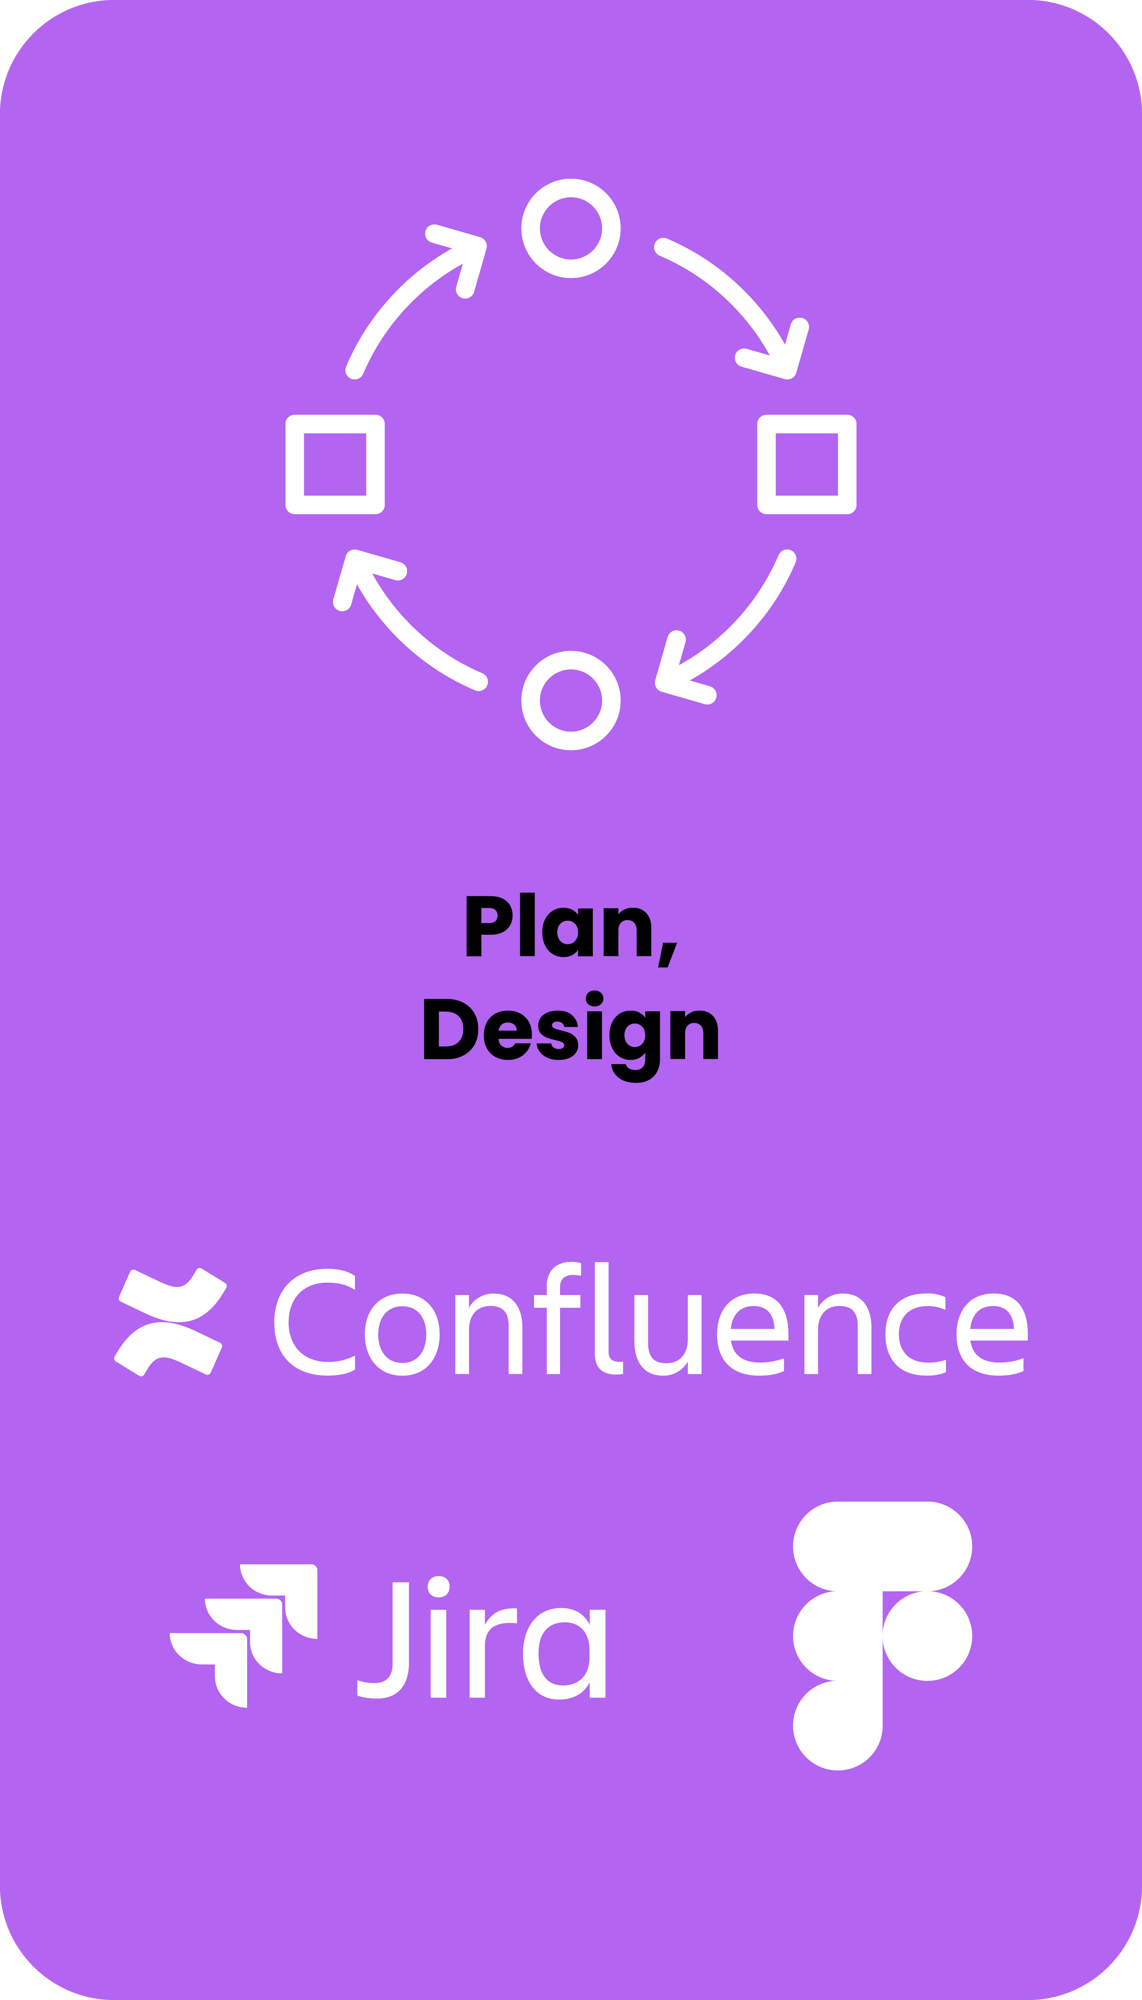 Plan and Design. Technologies include Jira, Confluence, and Figma.